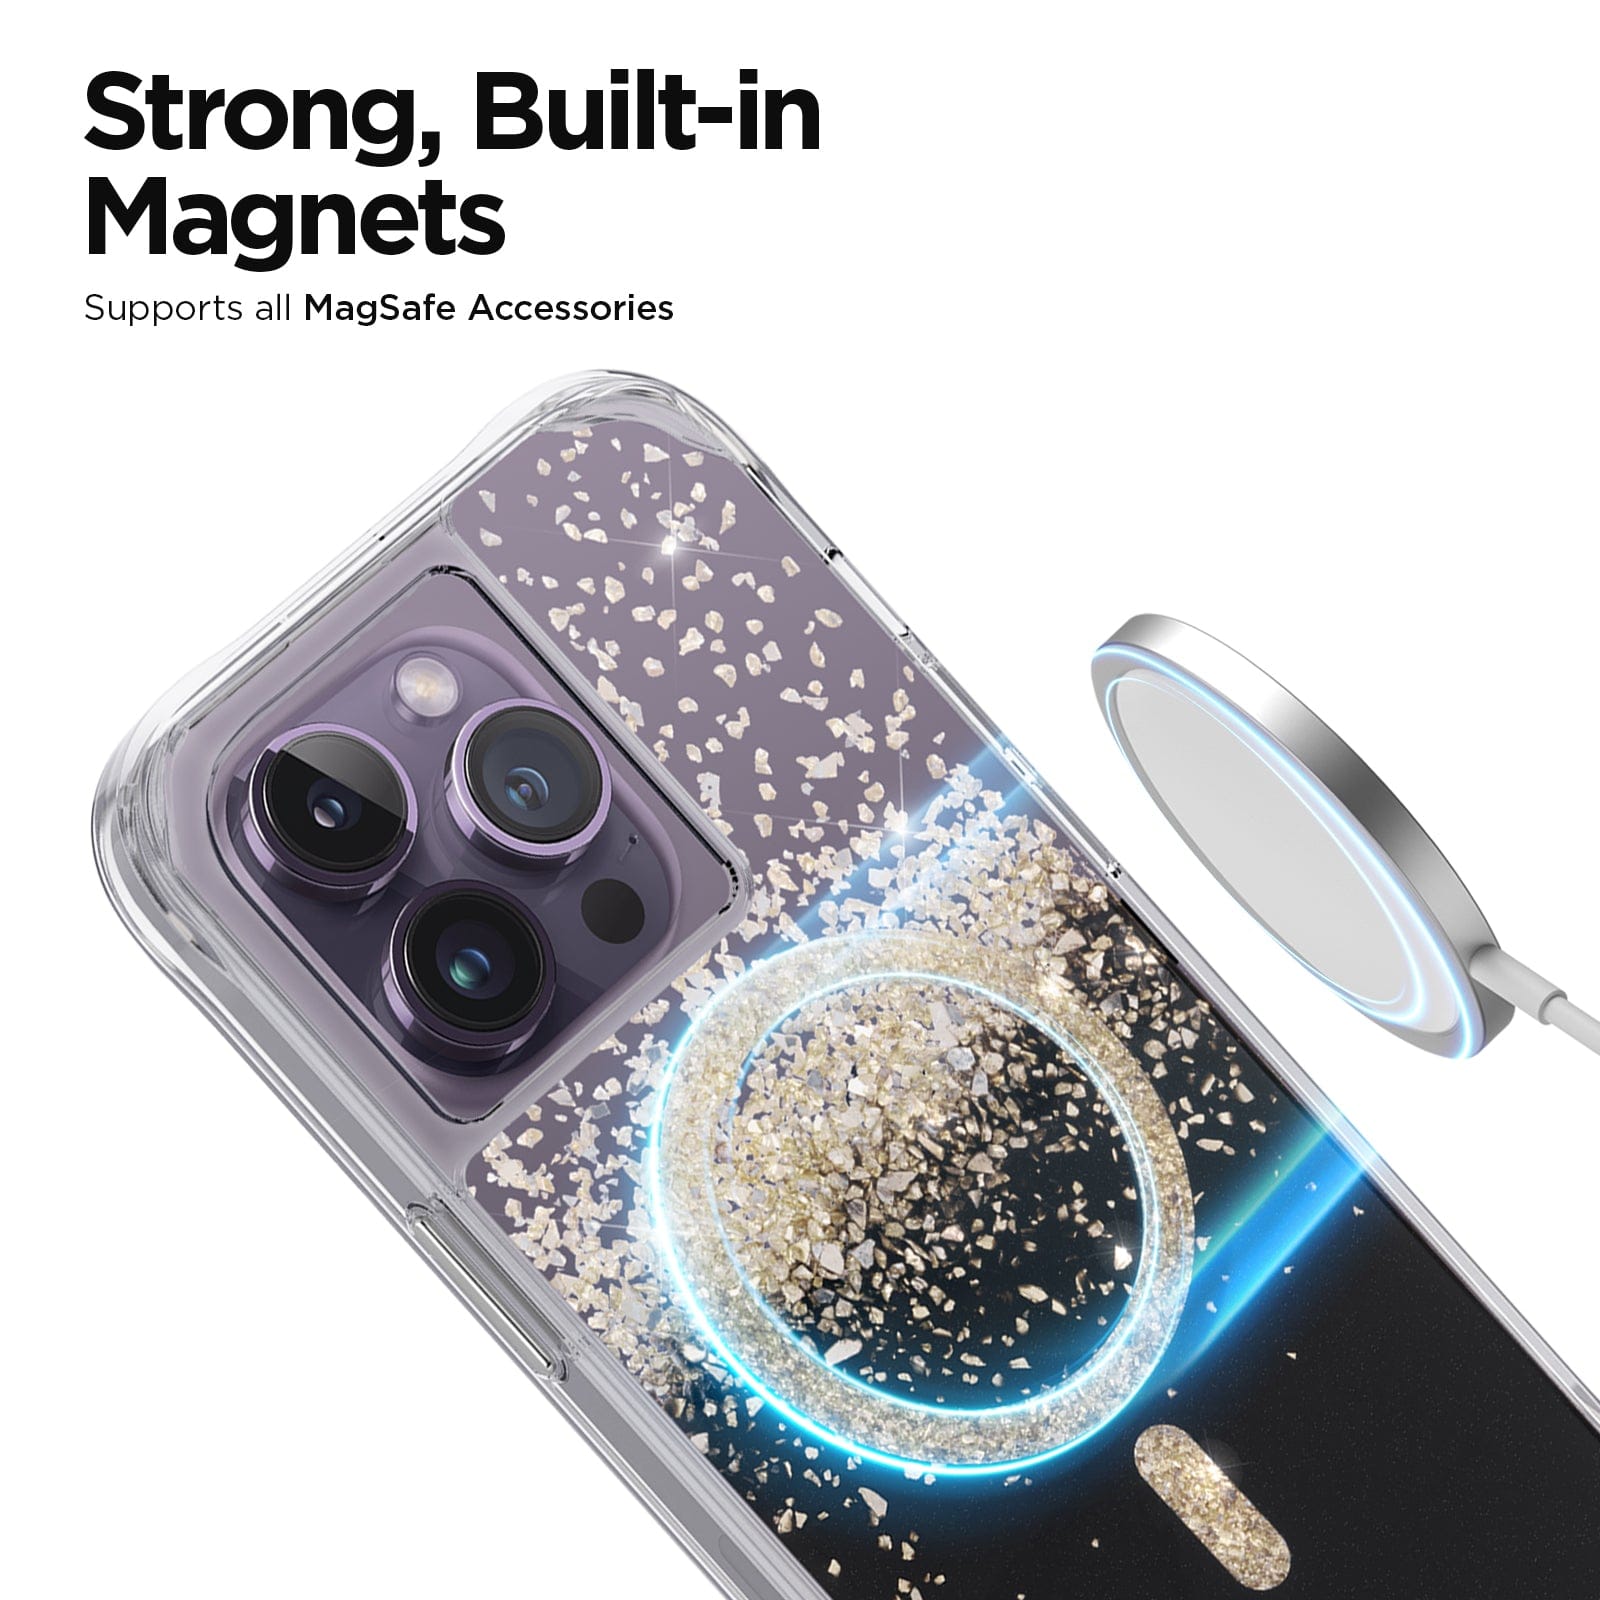 STRONG, BUILT IN MAGNETS. SUPPORTS ALL MAGSAFE ACCESSORIES. 